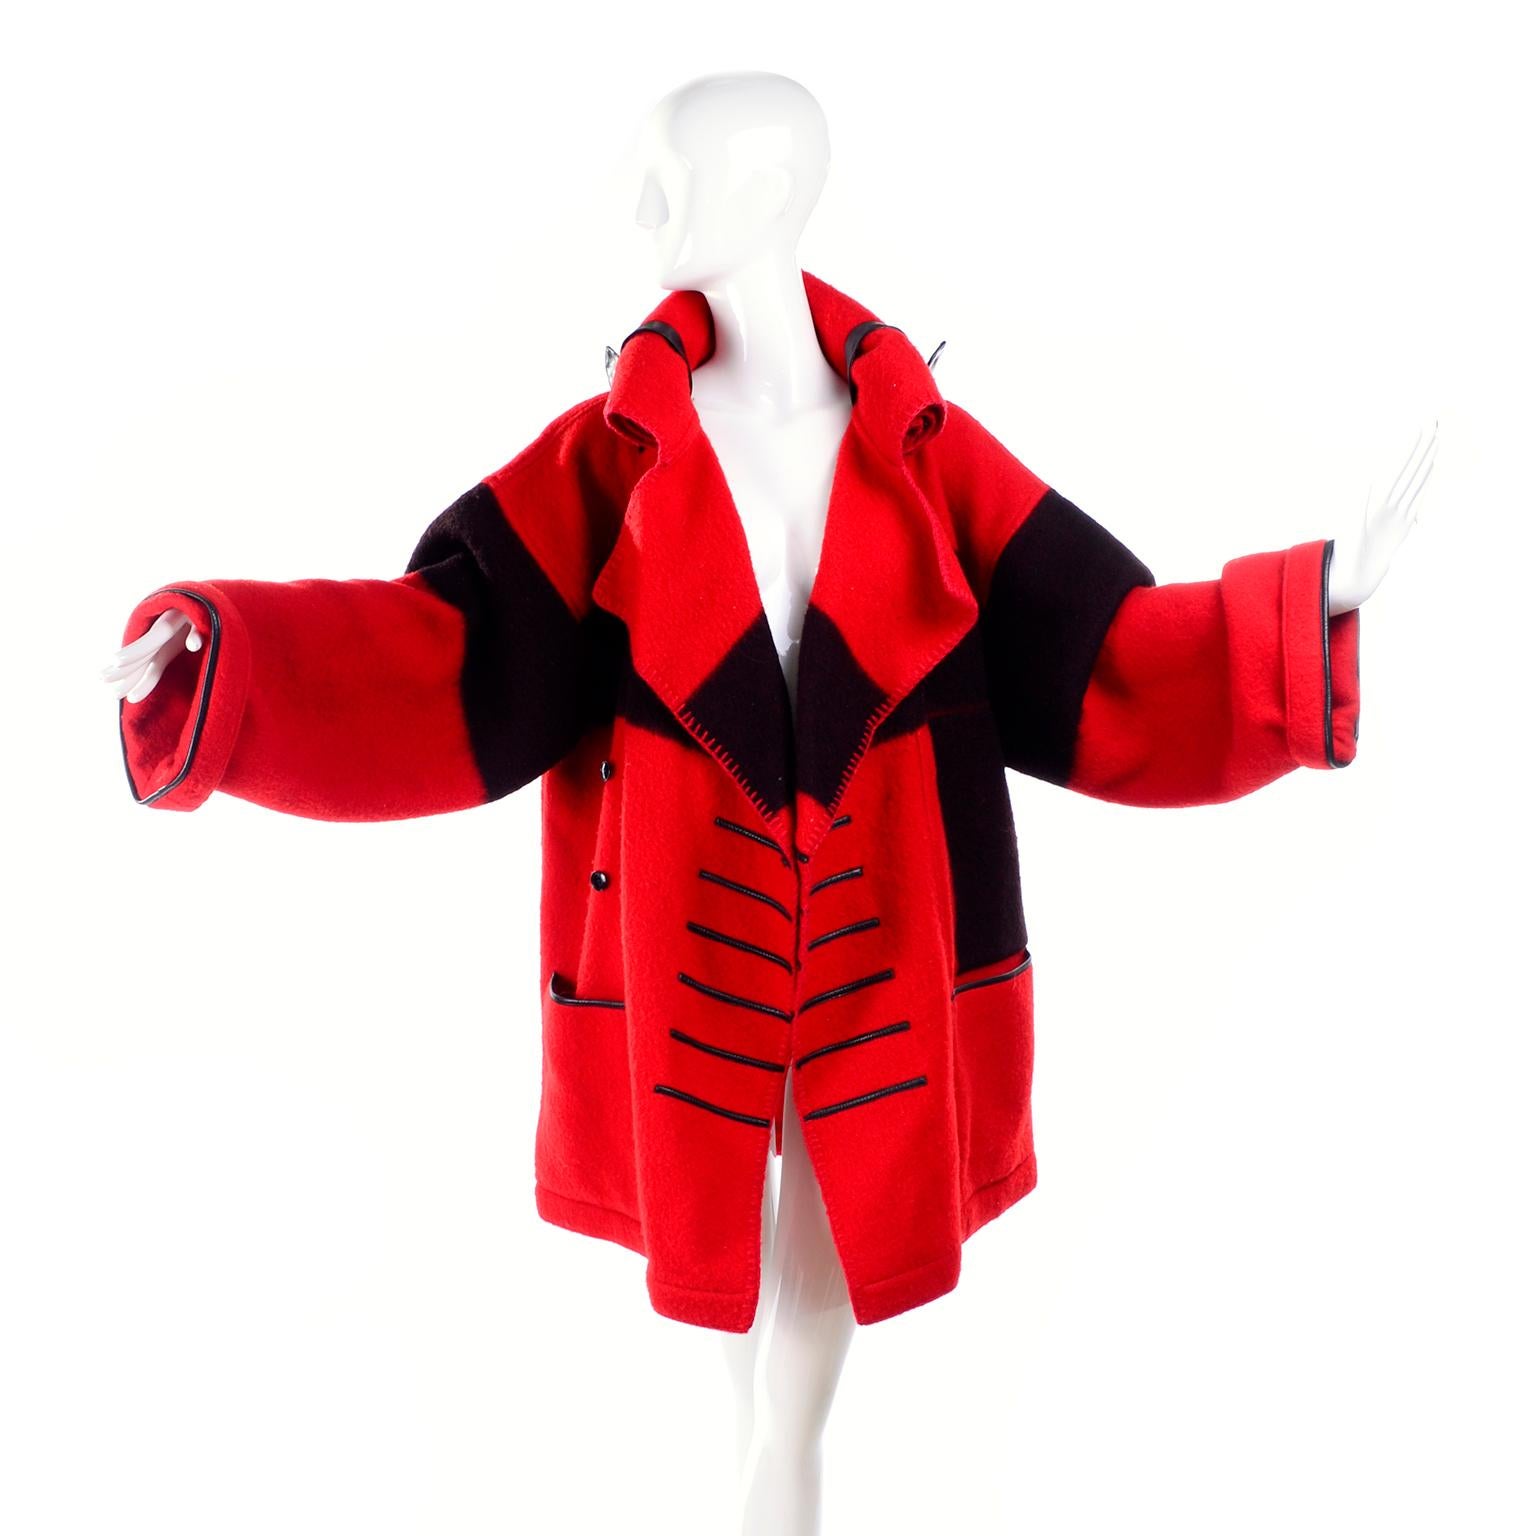 This is a fabulous red and black wool vintage Jean-Charles de Castelbajac 1980s blanket coat with a pointed hood. The hood can be rolled and fastened with the leather straps similar to the way a blanket roll is secured! There are front pockets,